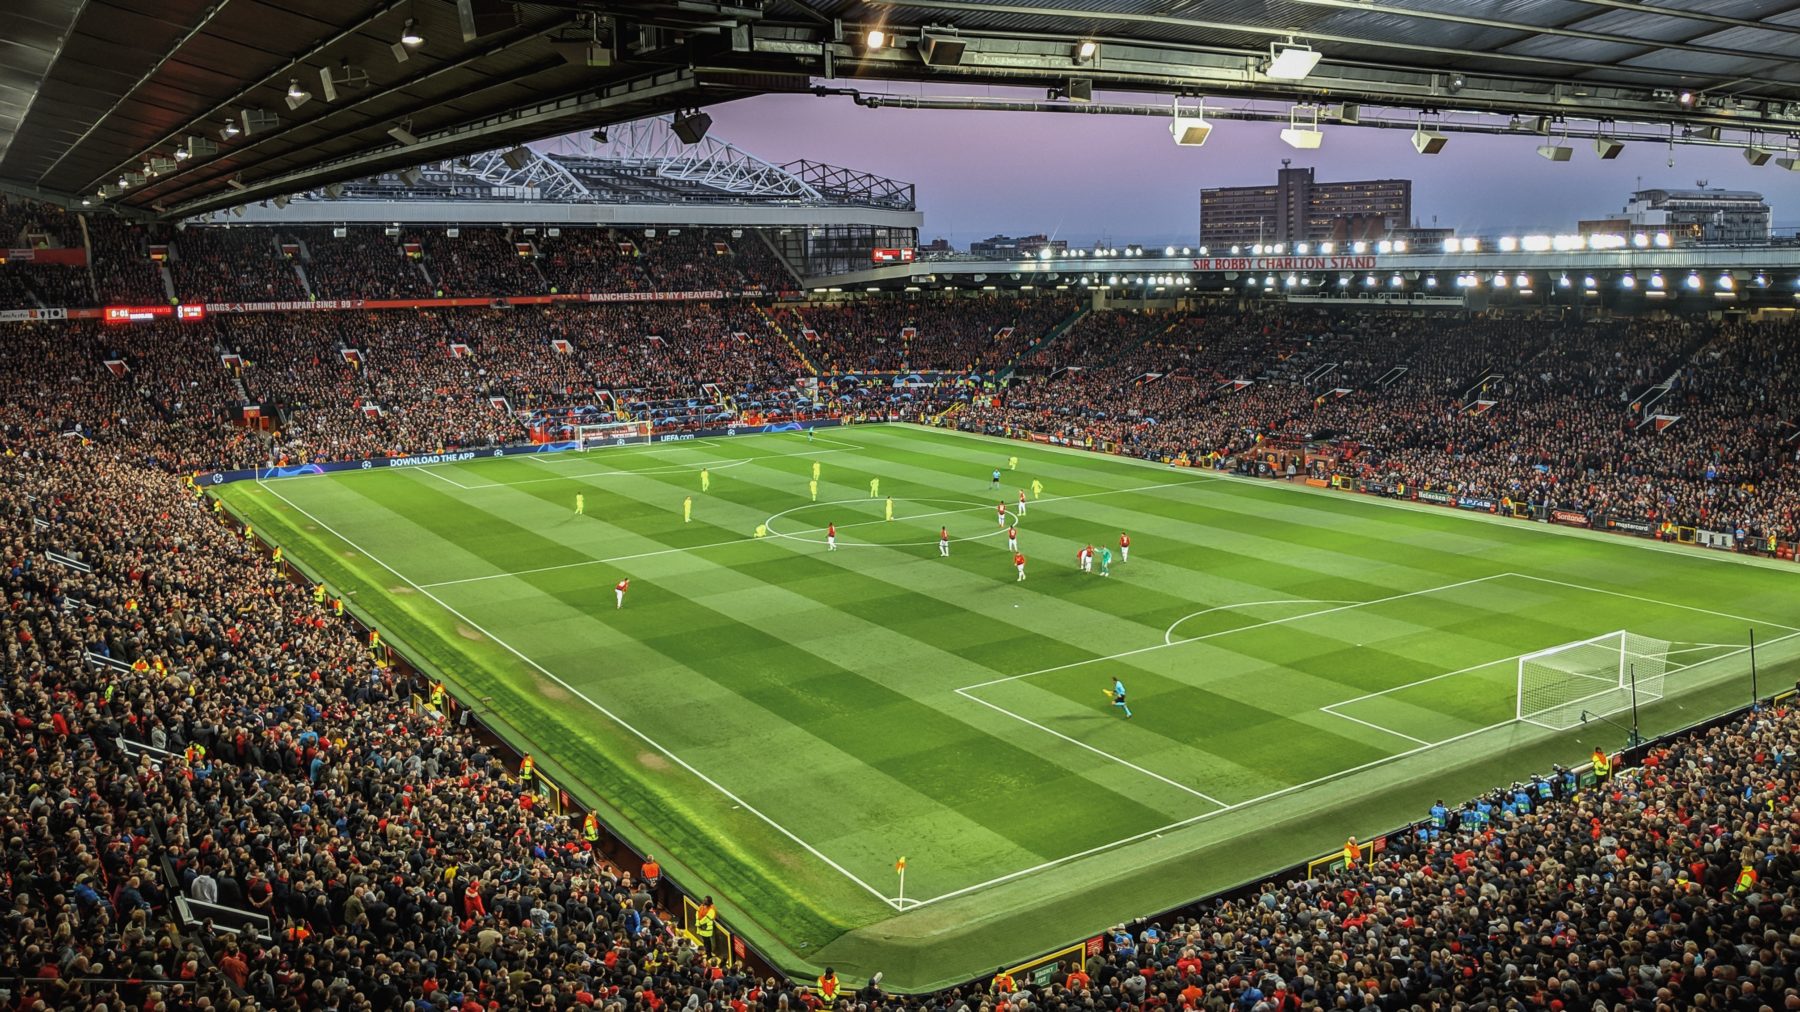 A wide image of Old Trafford, the home ground of Manchester United Football Club in Manchester, England.